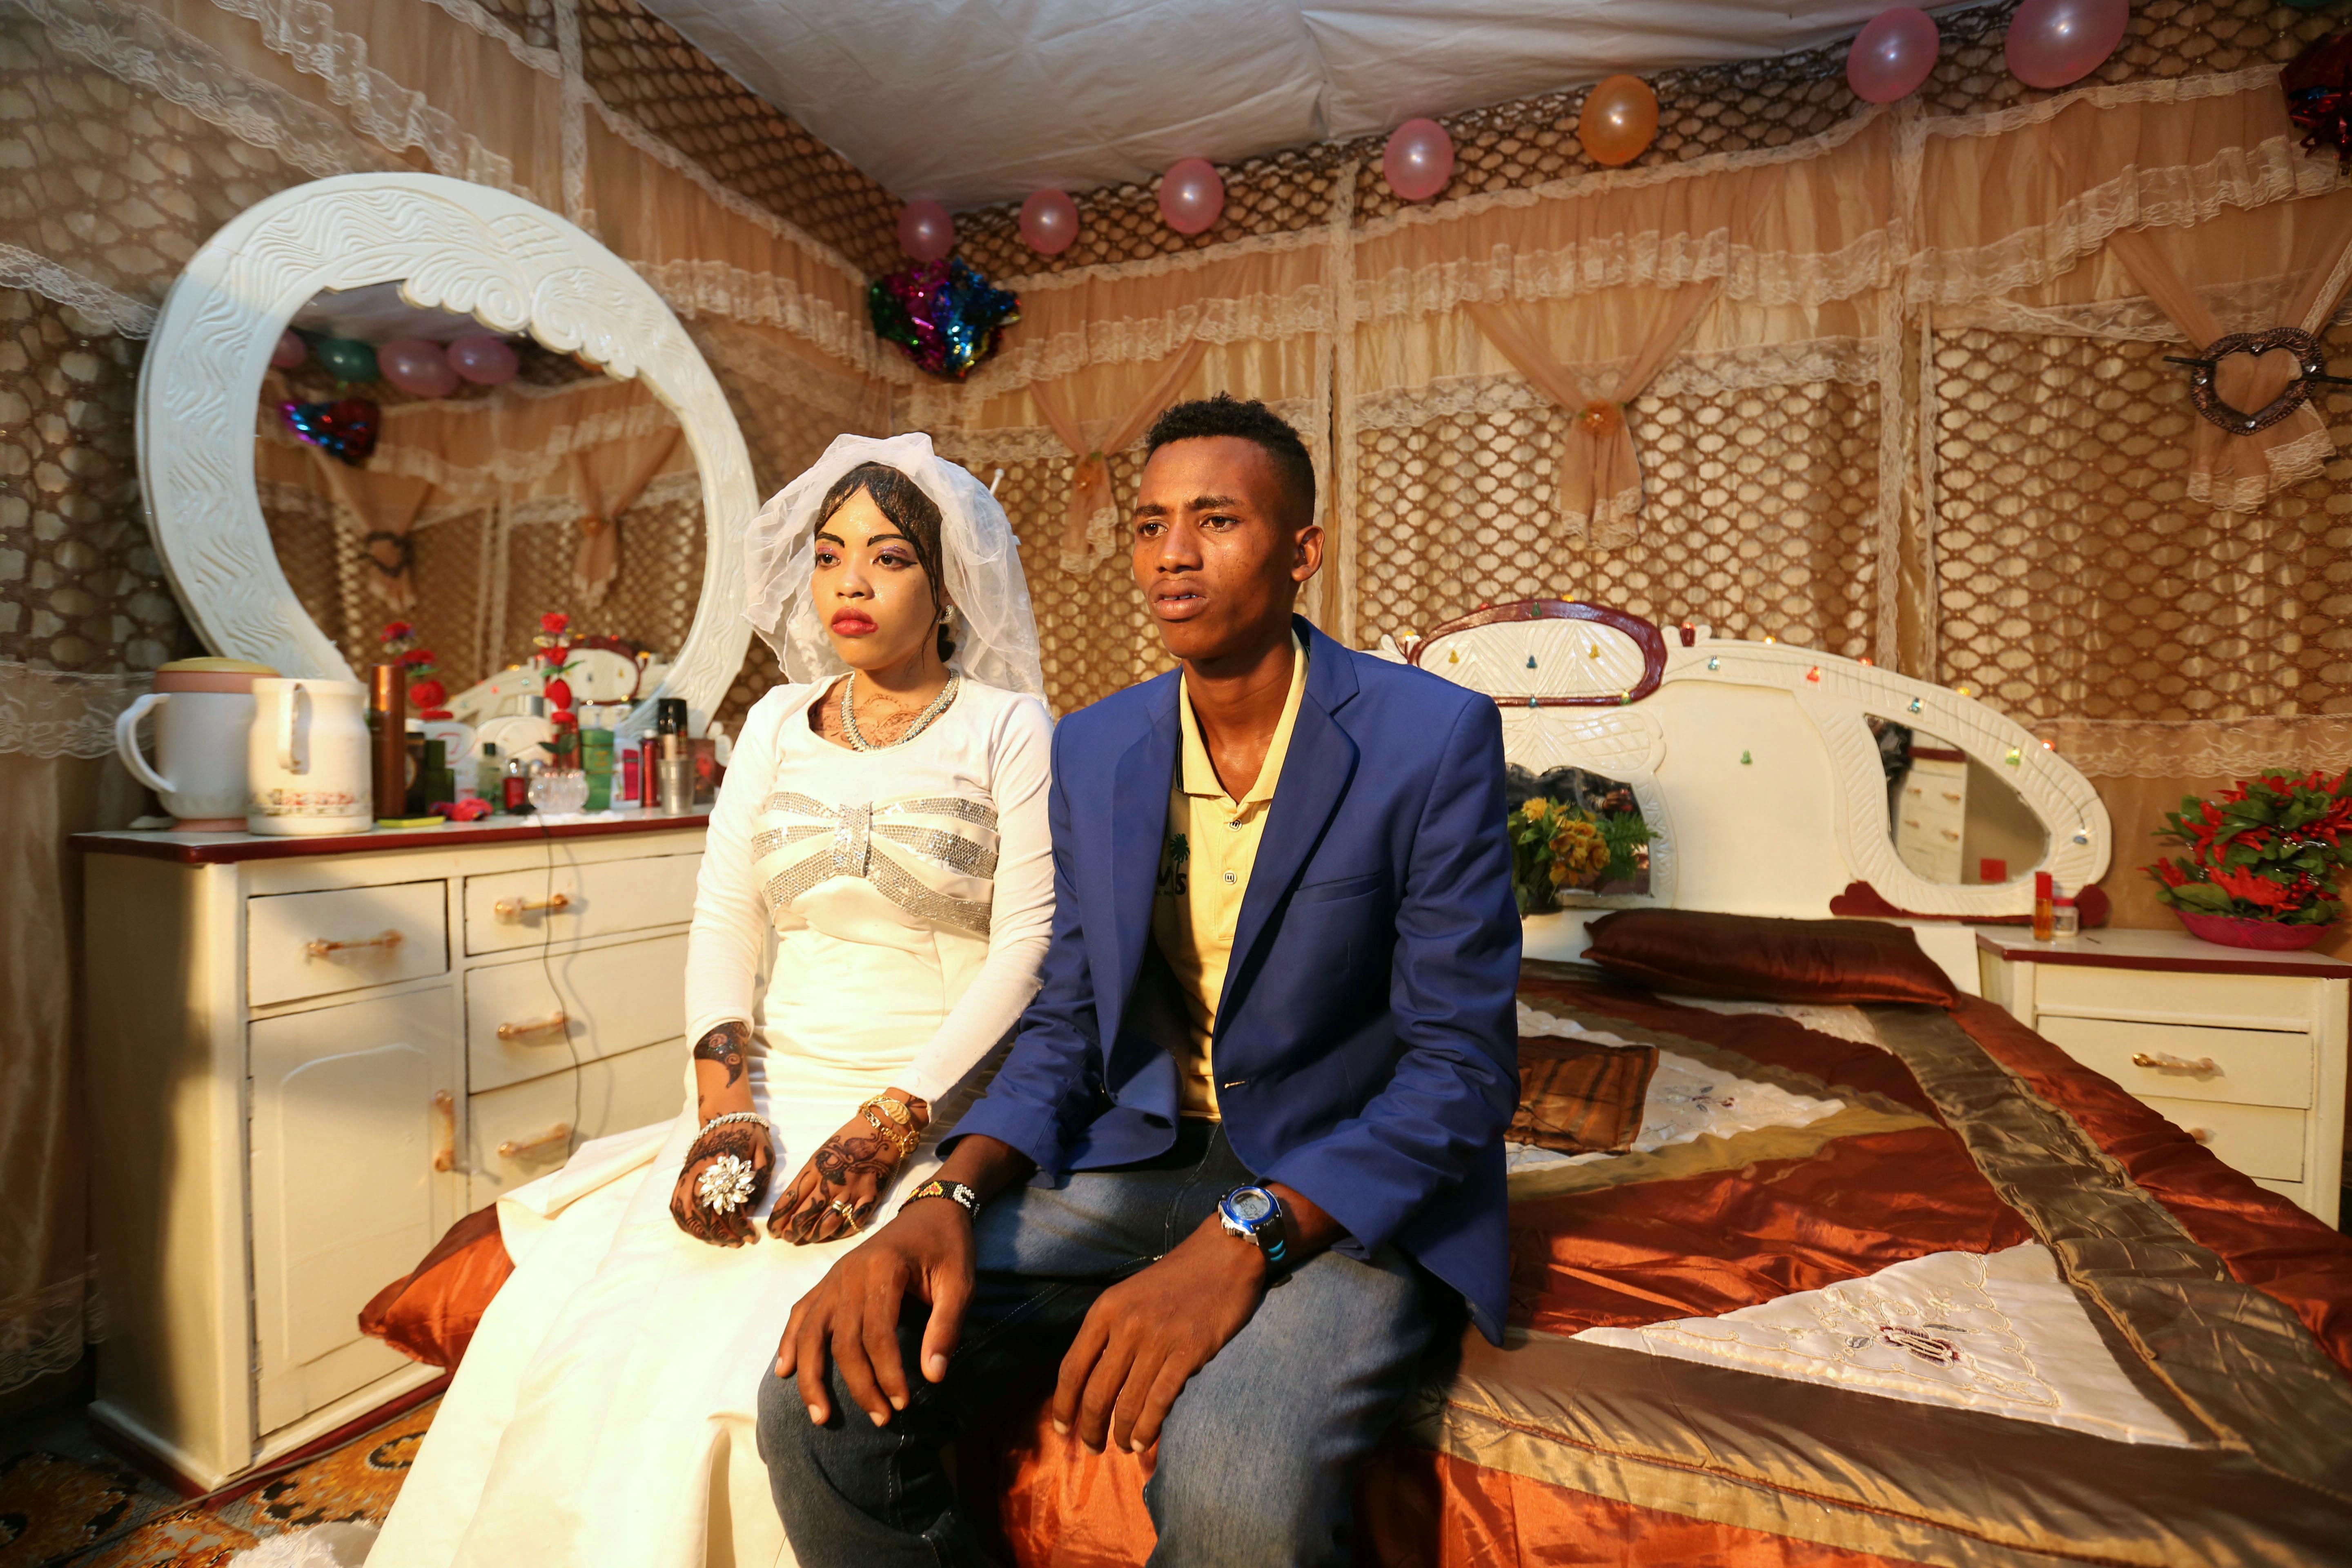 The Wider Image: Wedding in a Mogadishu camp